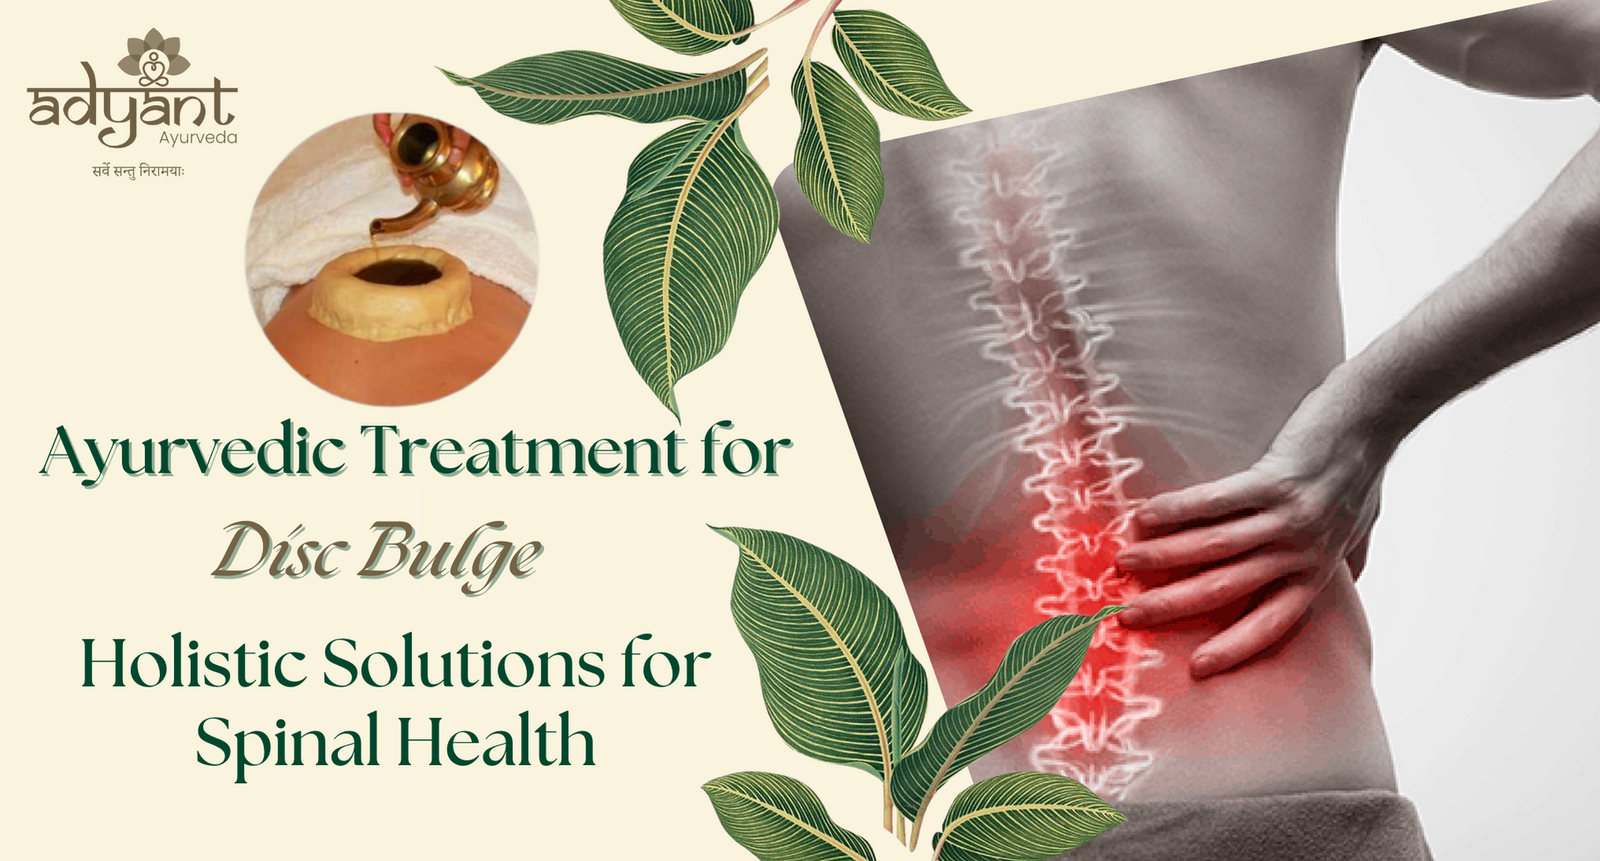 Ayurvedic Treatment for Disc Bulge: Home Remedies, Causes, and Symptoms